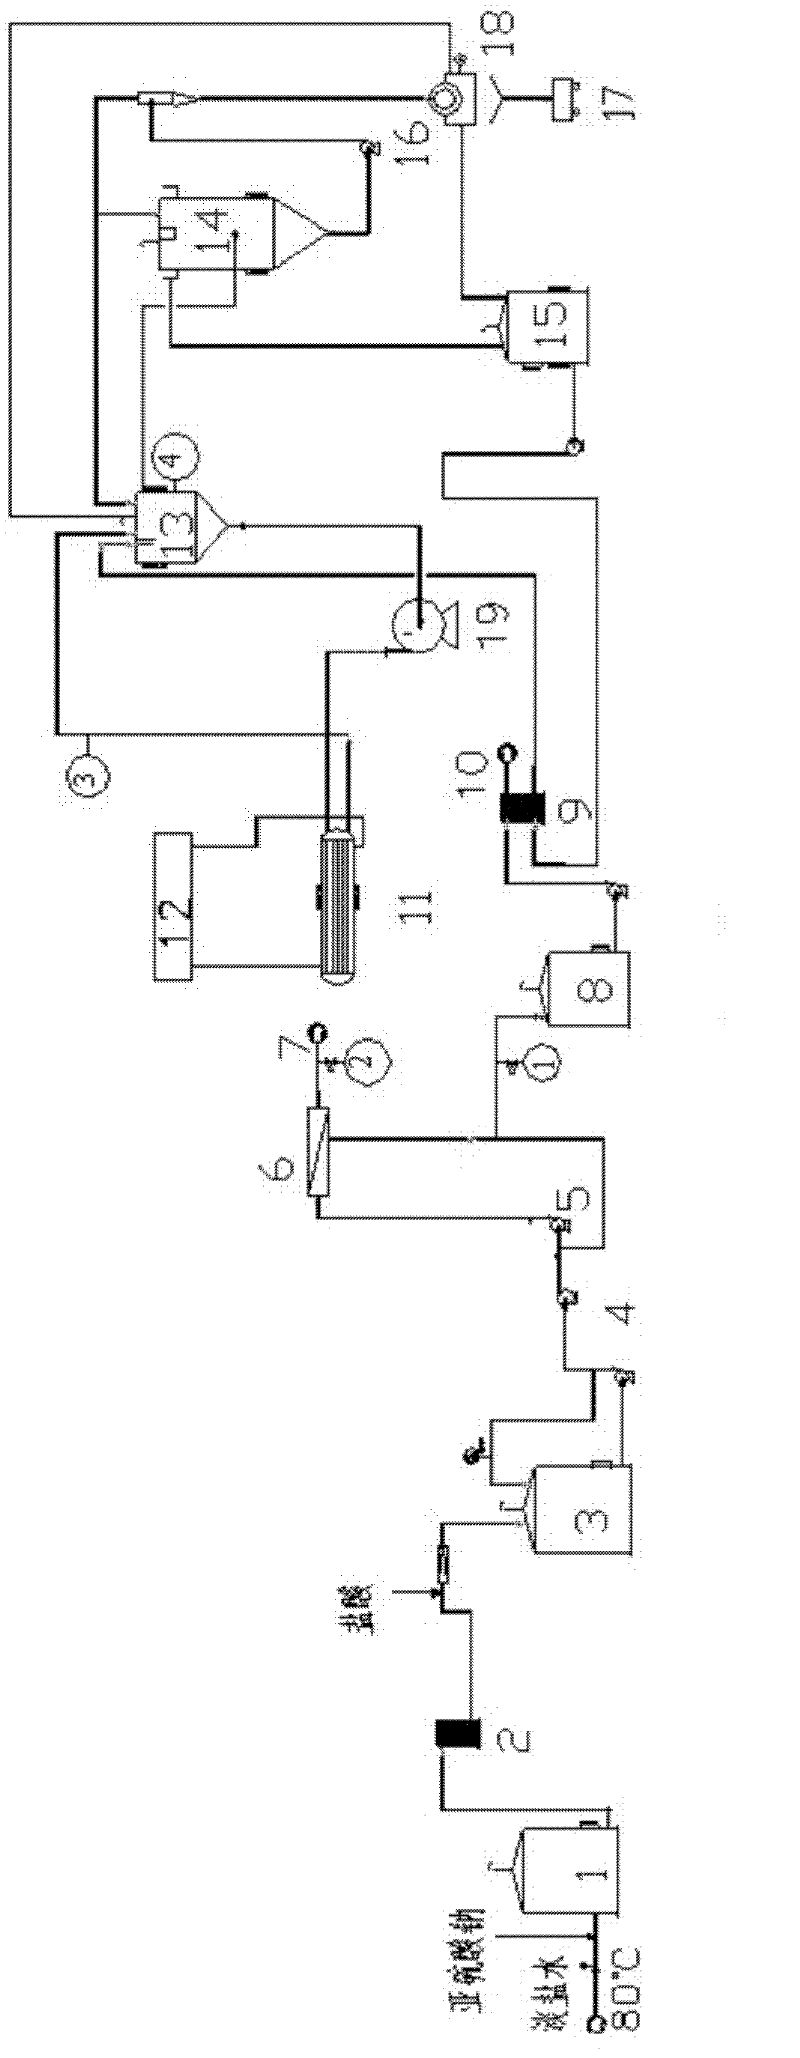 Production method for increasing nitrate removal capacity by membrane method